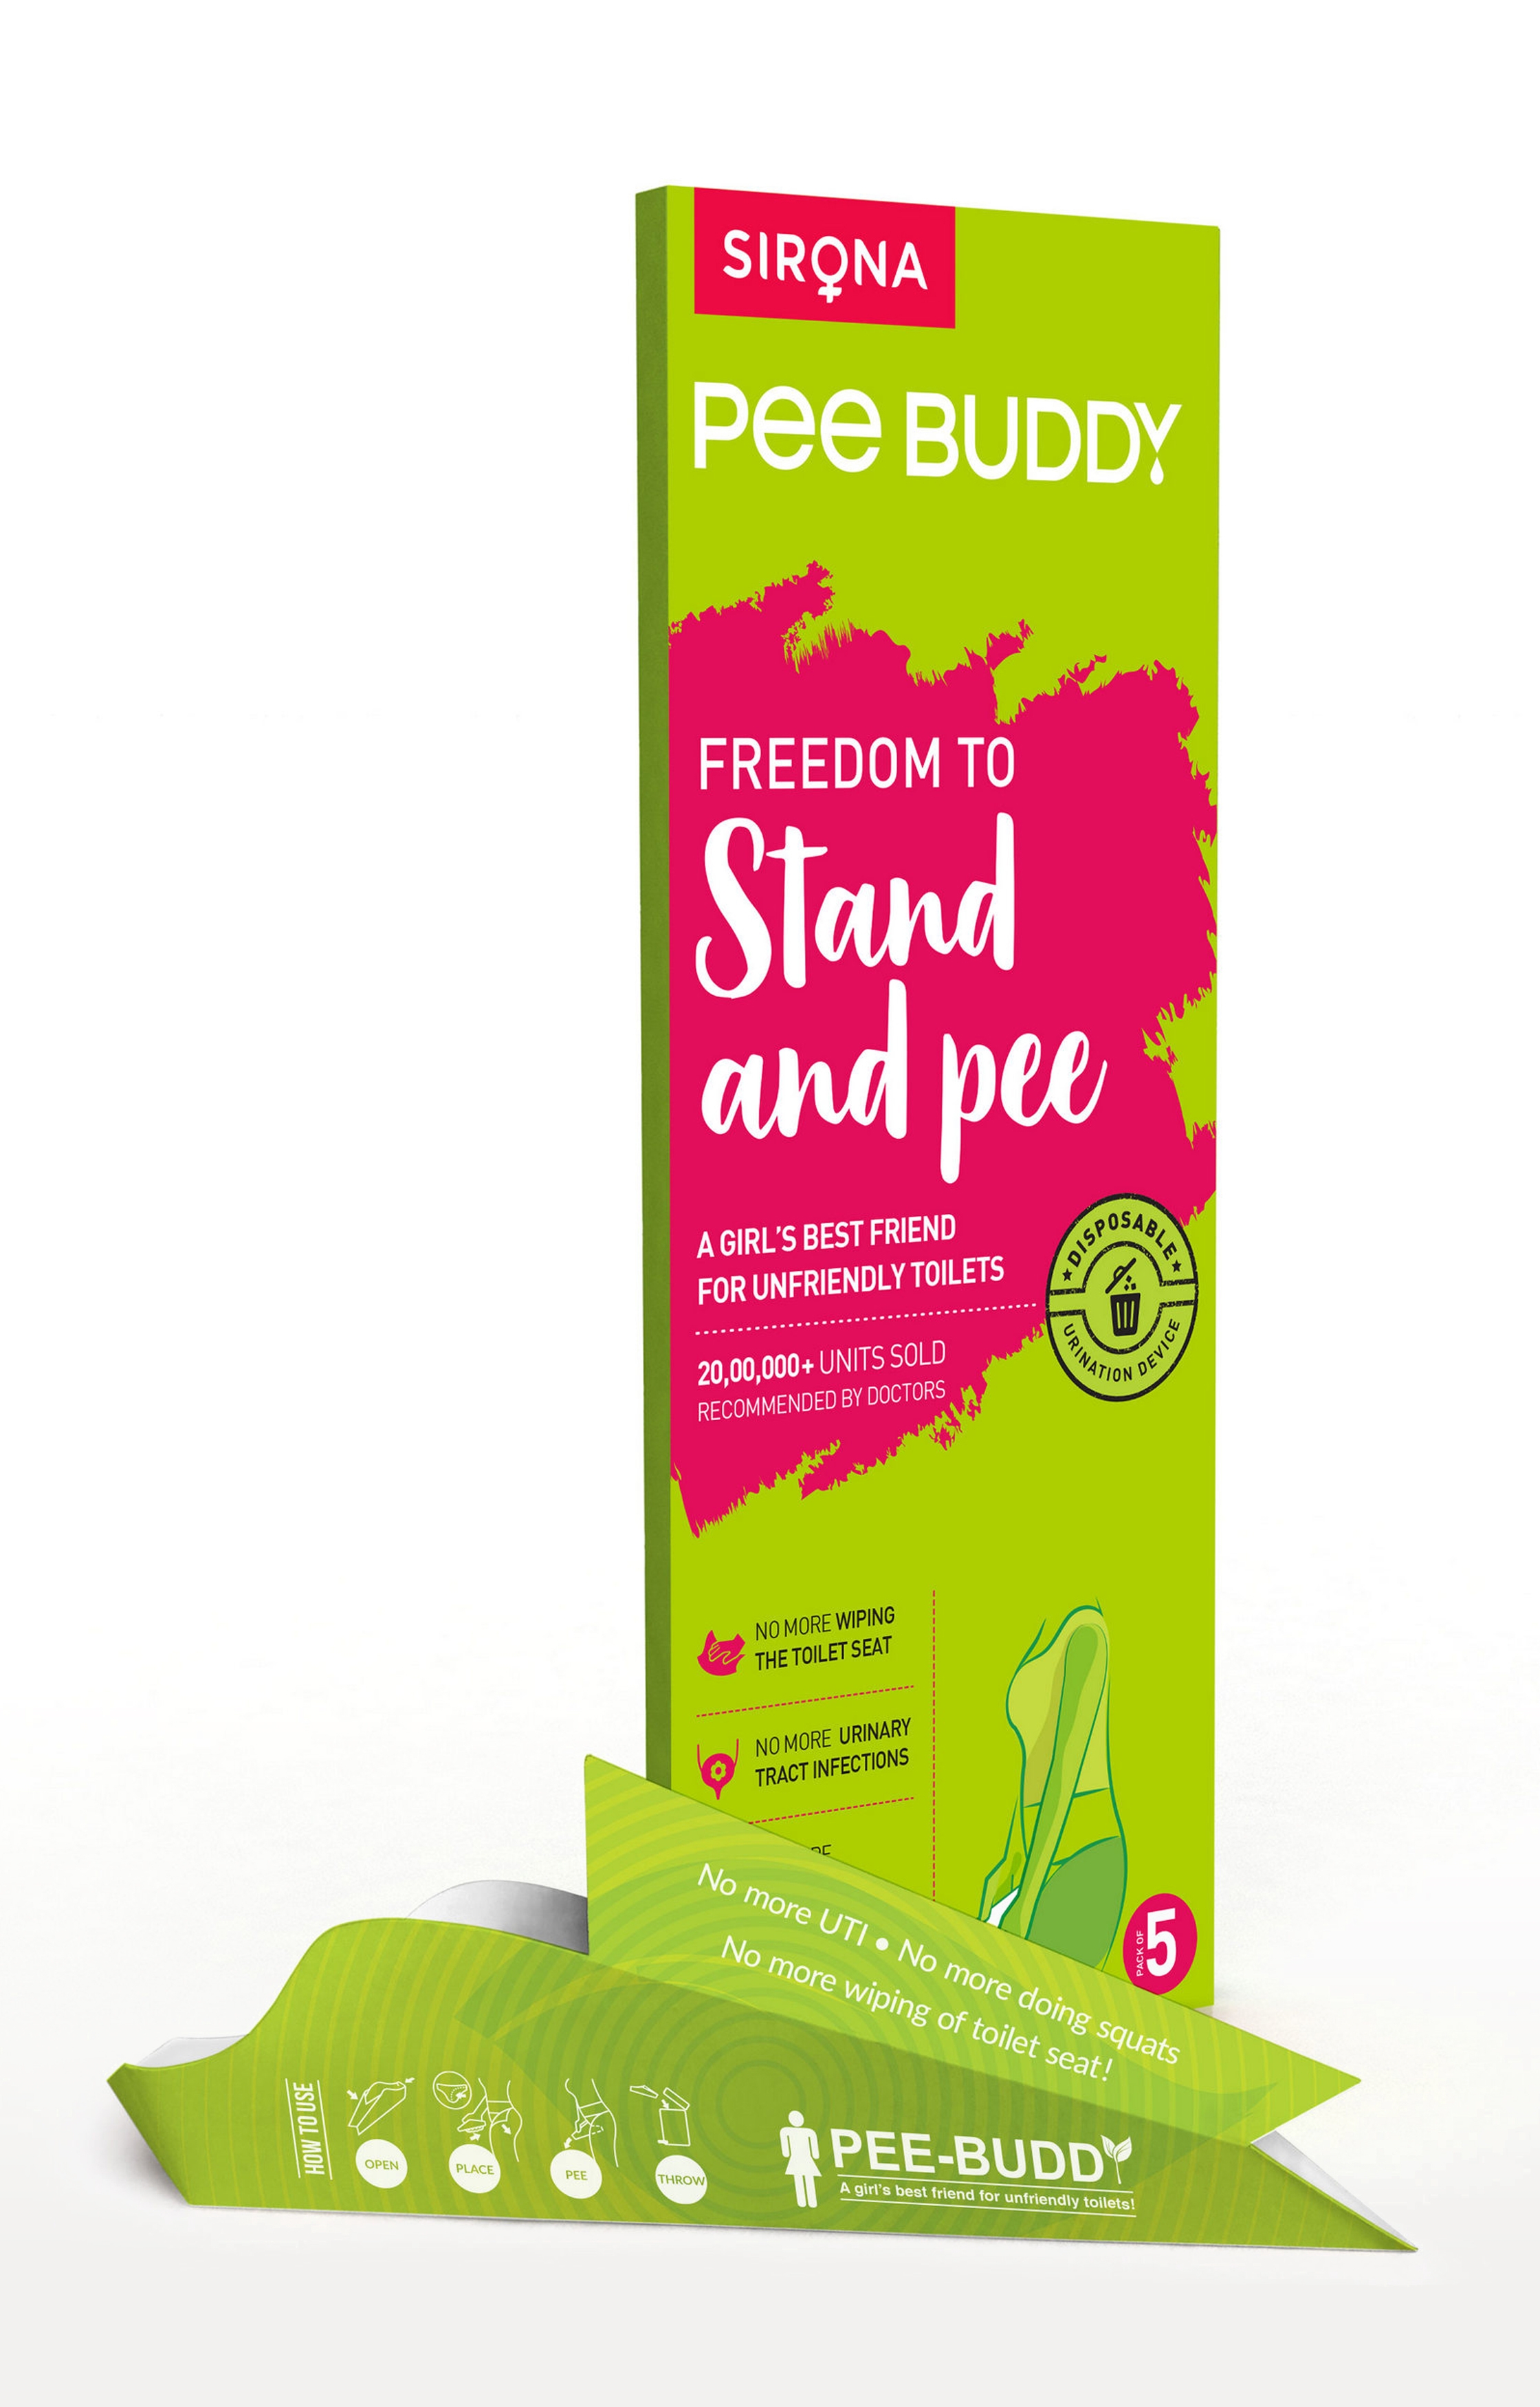 PEE BUDDY | Peebuddy - Disposable, Portable Female Urination Device For Women - 5 Funnels